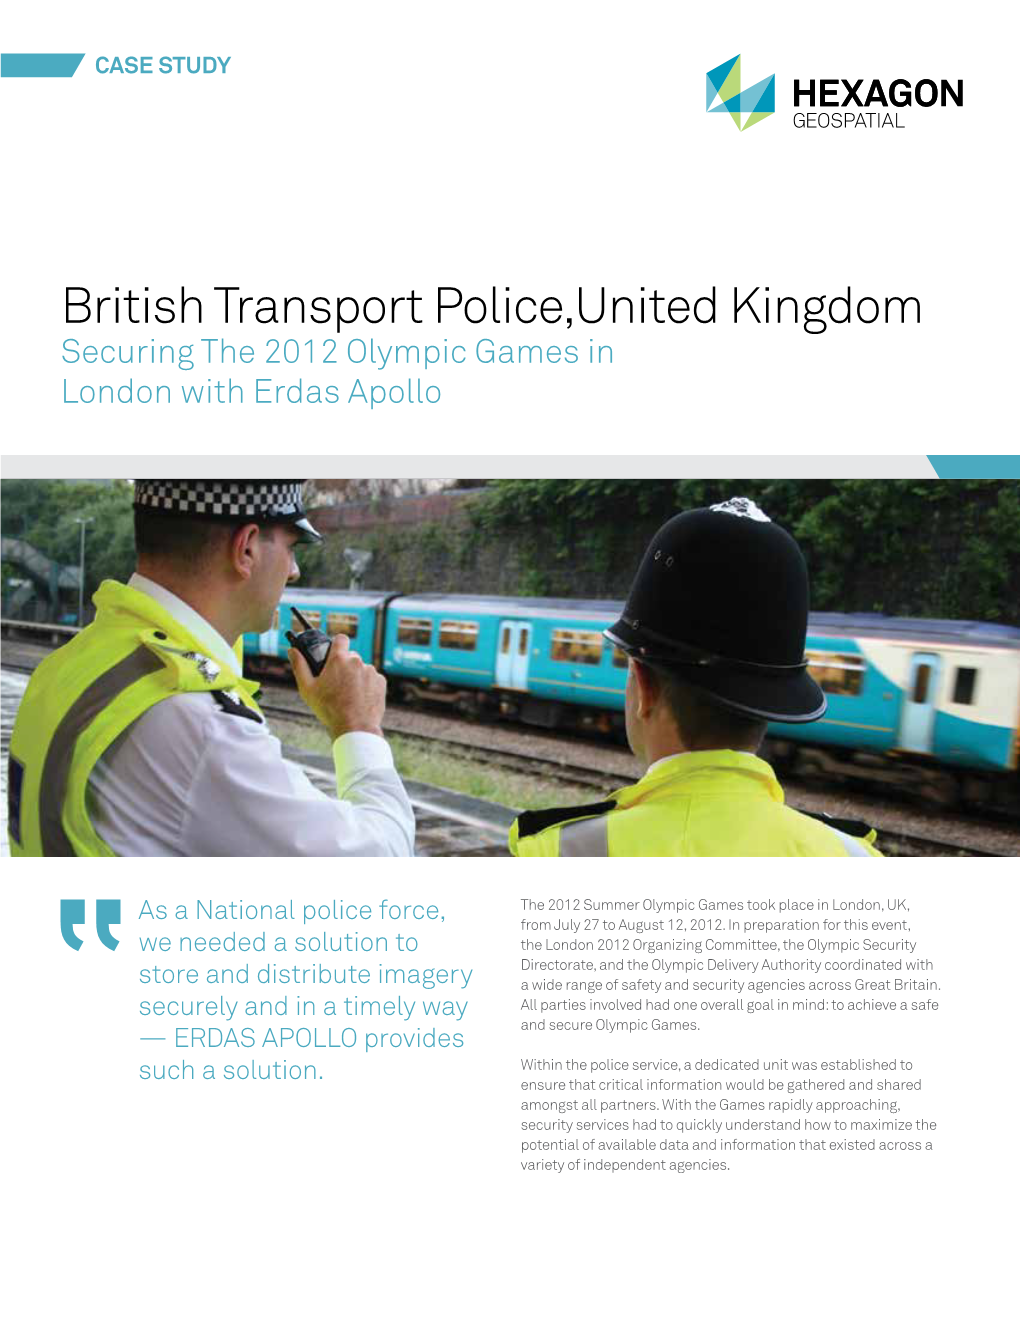 British Transport Police,United Kingdom Securing the 2012 Olympic Games in London with Erdas Apollo